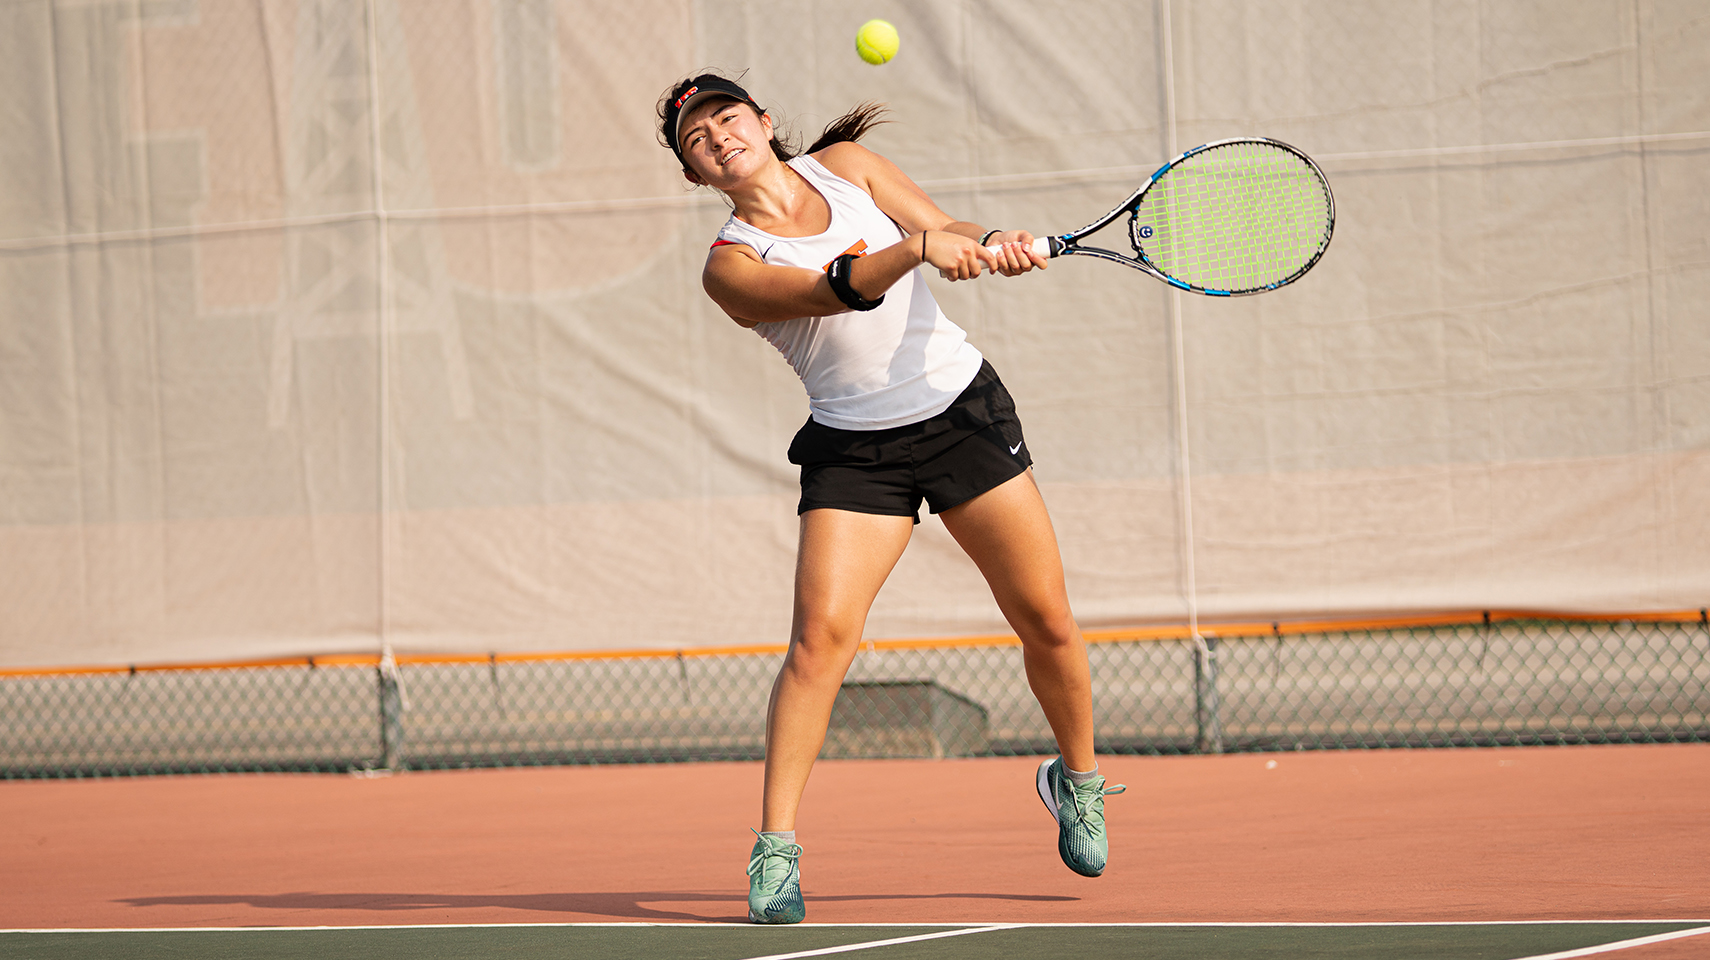 Women's tennis player hitting backhanded off a serve